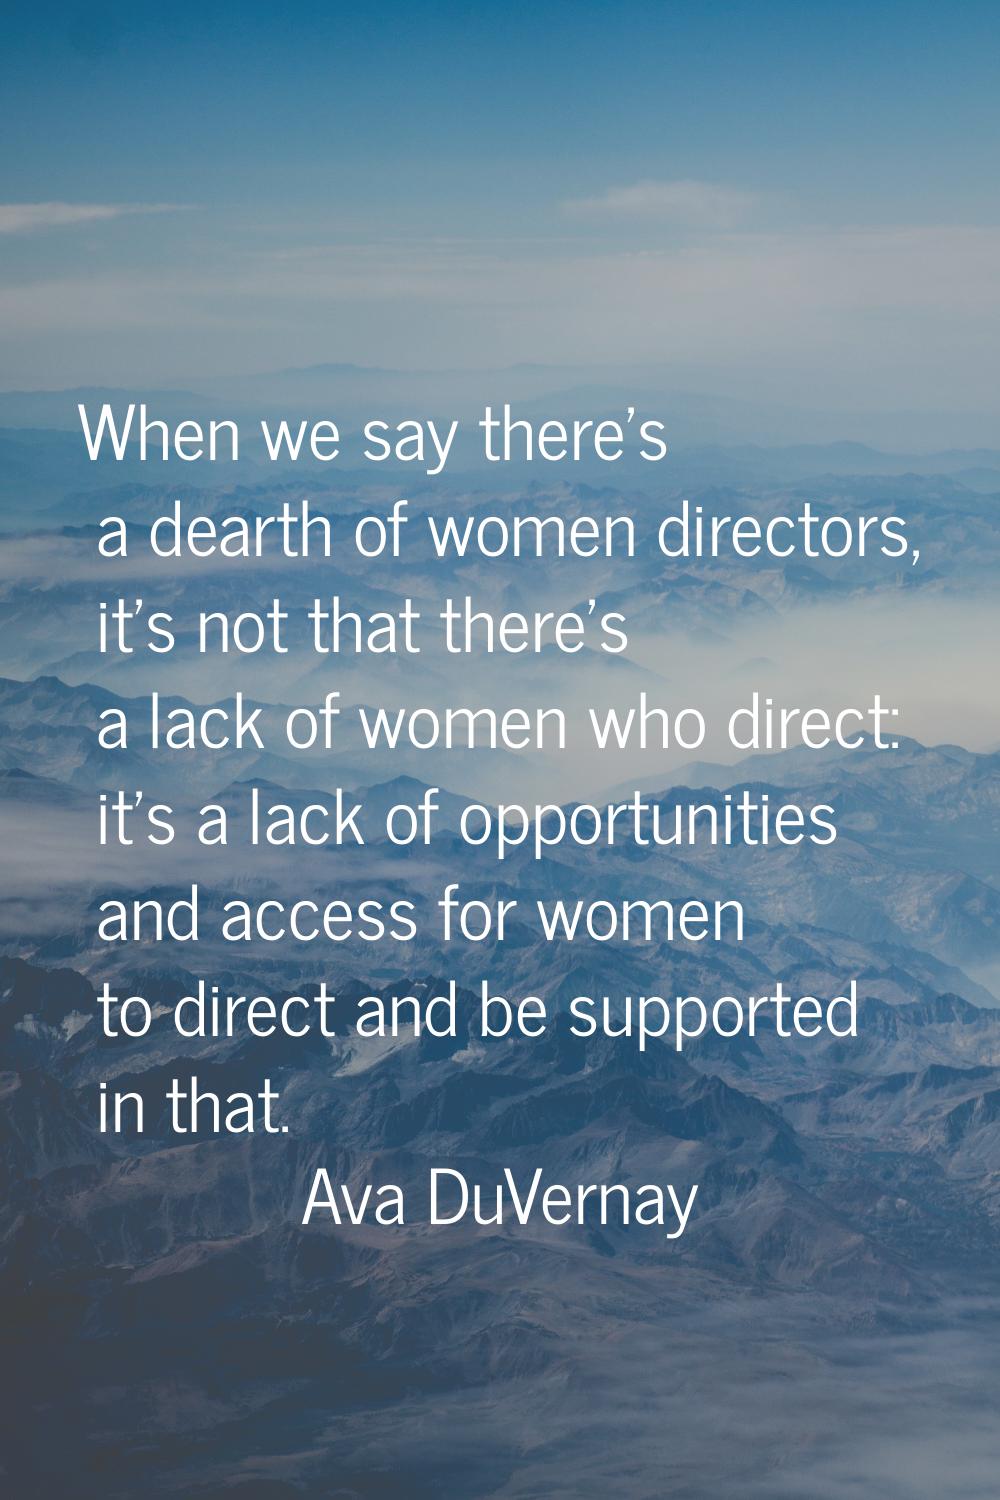 When we say there's a dearth of women directors, it's not that there's a lack of women who direct: 